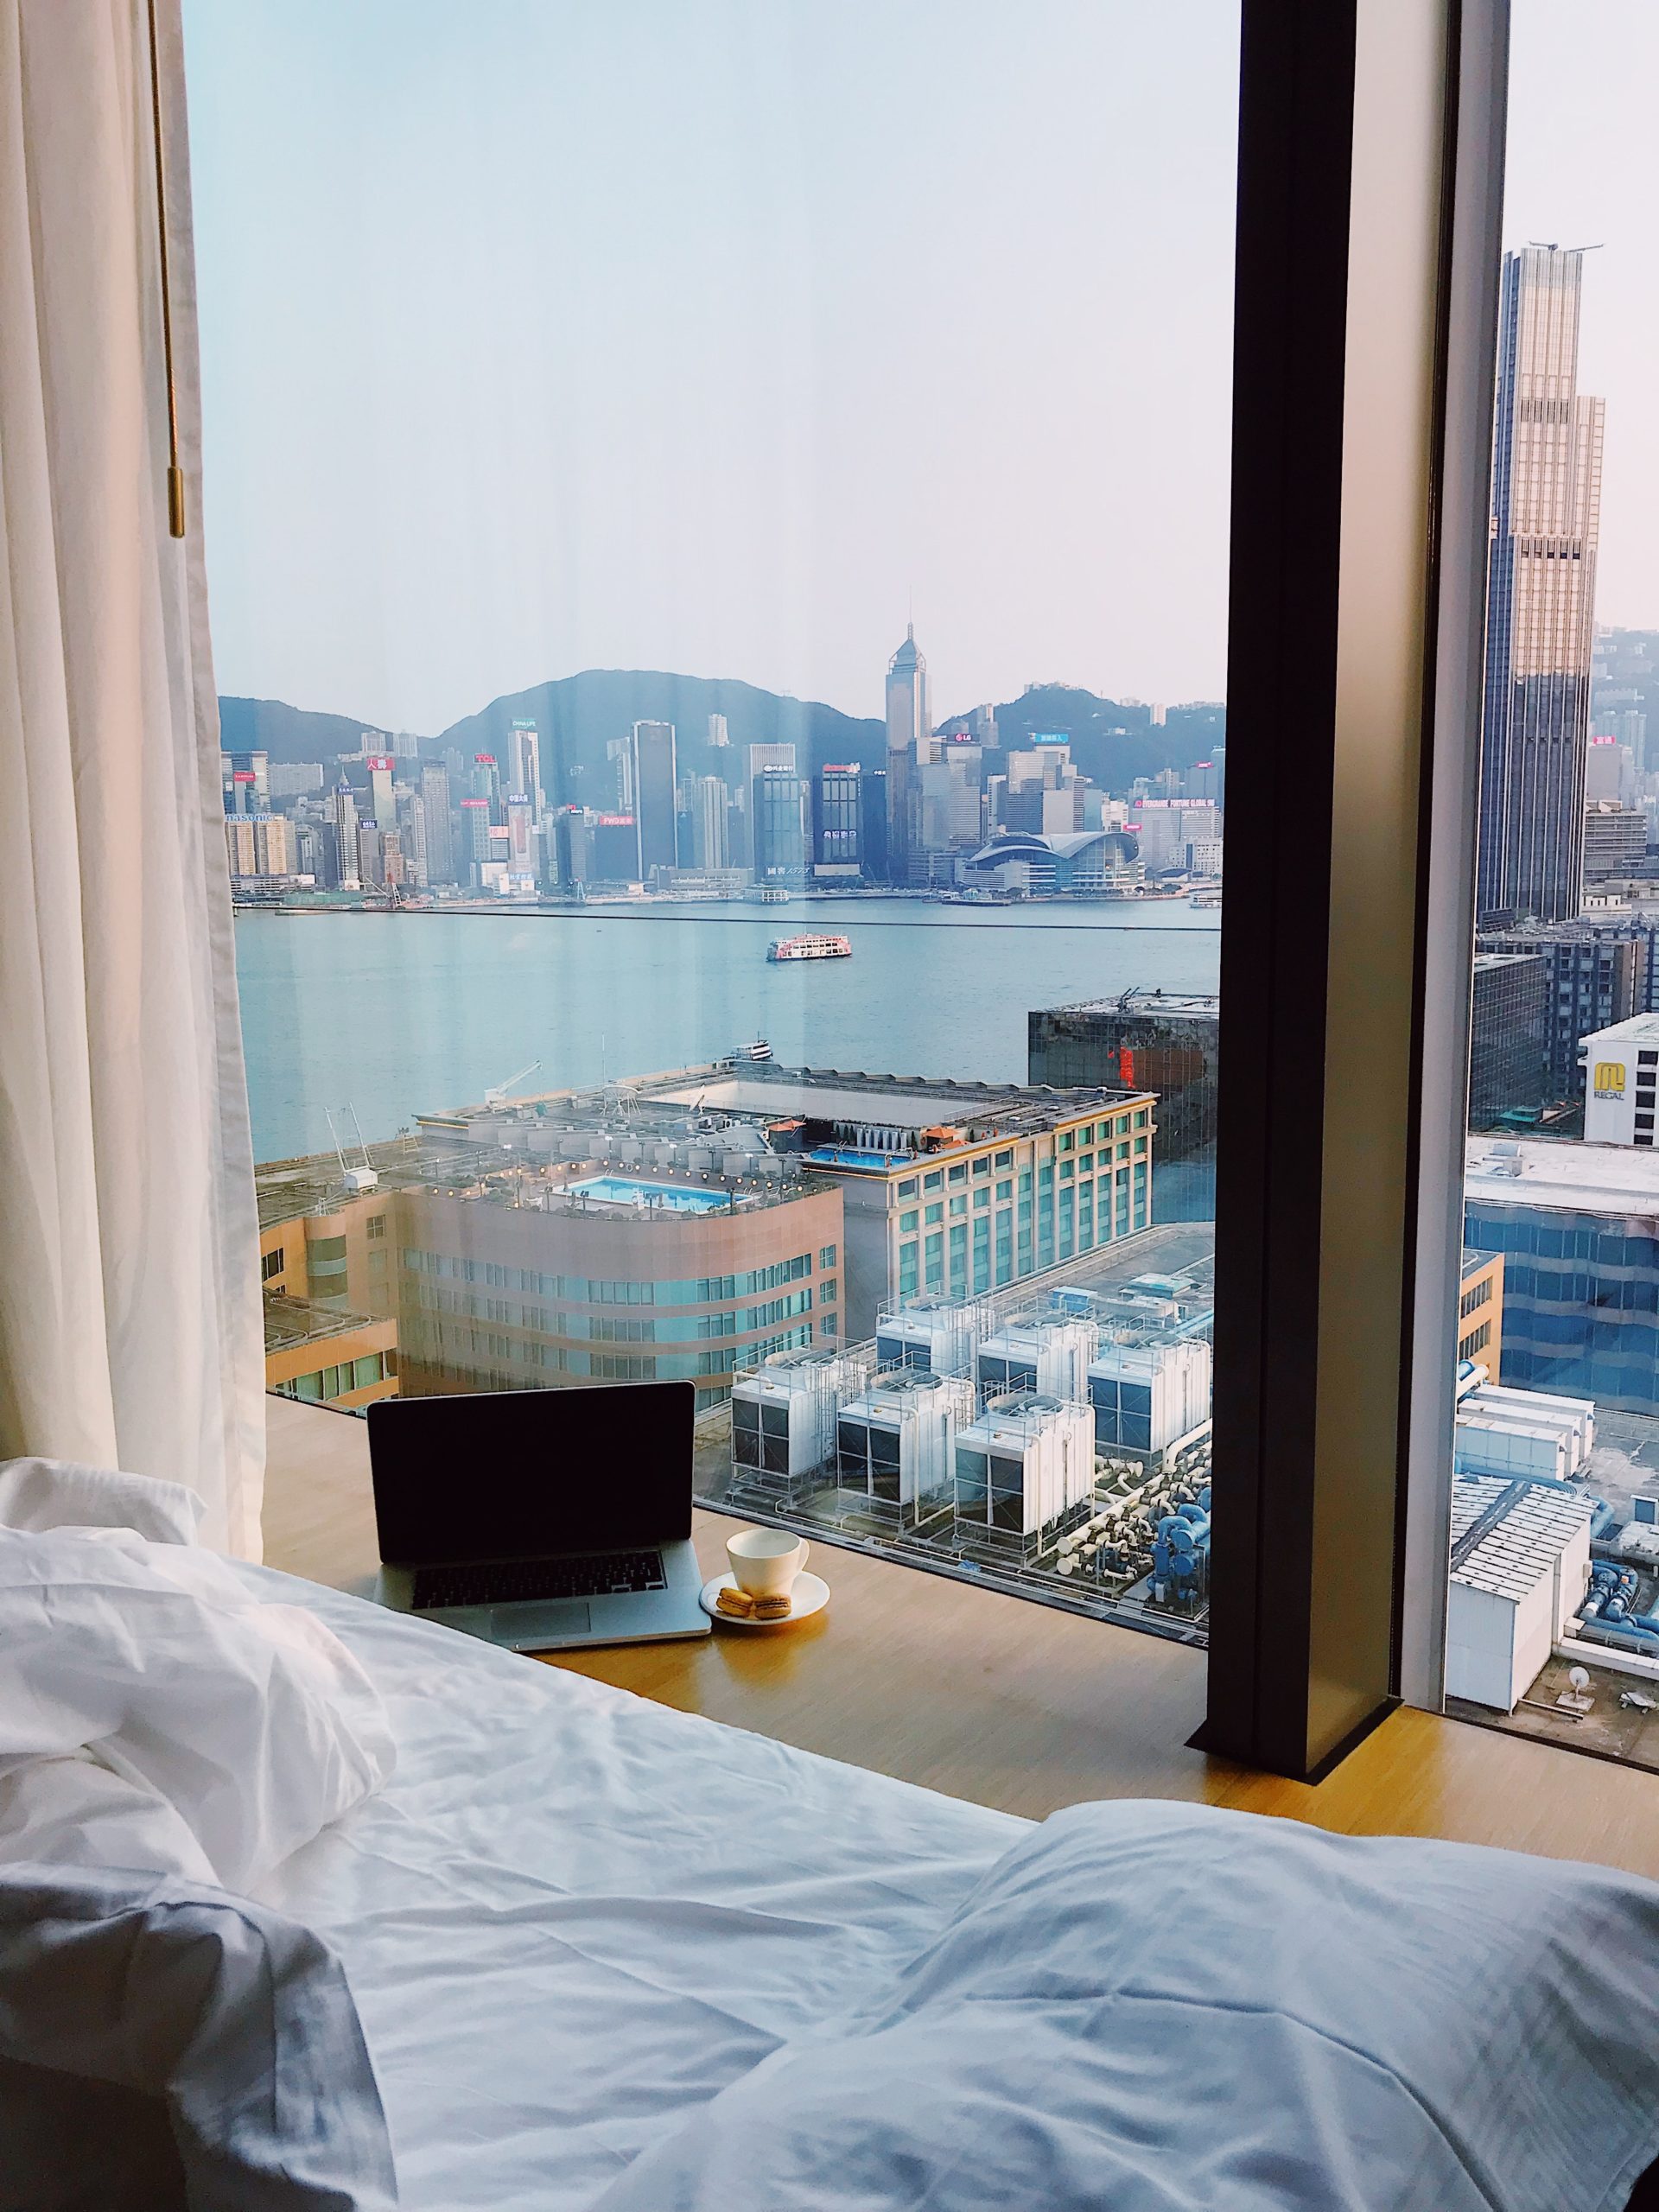 Sleeping in an unfamiliar room or hotel can be difficult when you're traveling. Here are a few essentials to help you relax and get the sleep and rest you deserve. #Sleep #SleepRoutine #TravelEssentials #MindfulTravel #TheDimpleLife